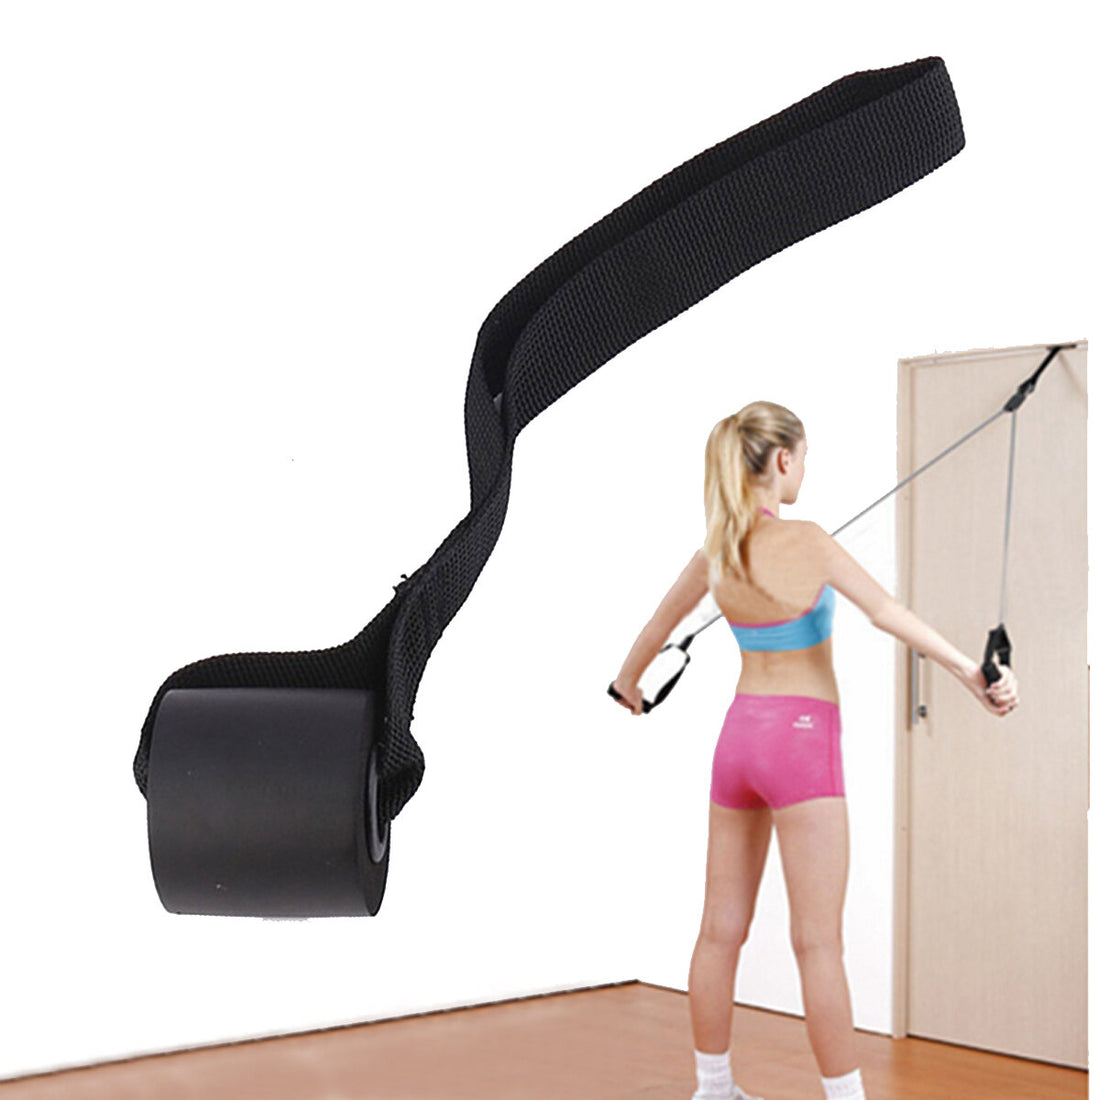 What Are Door Anchors for Resistance Bands and Exercises You Can Do Using Them?